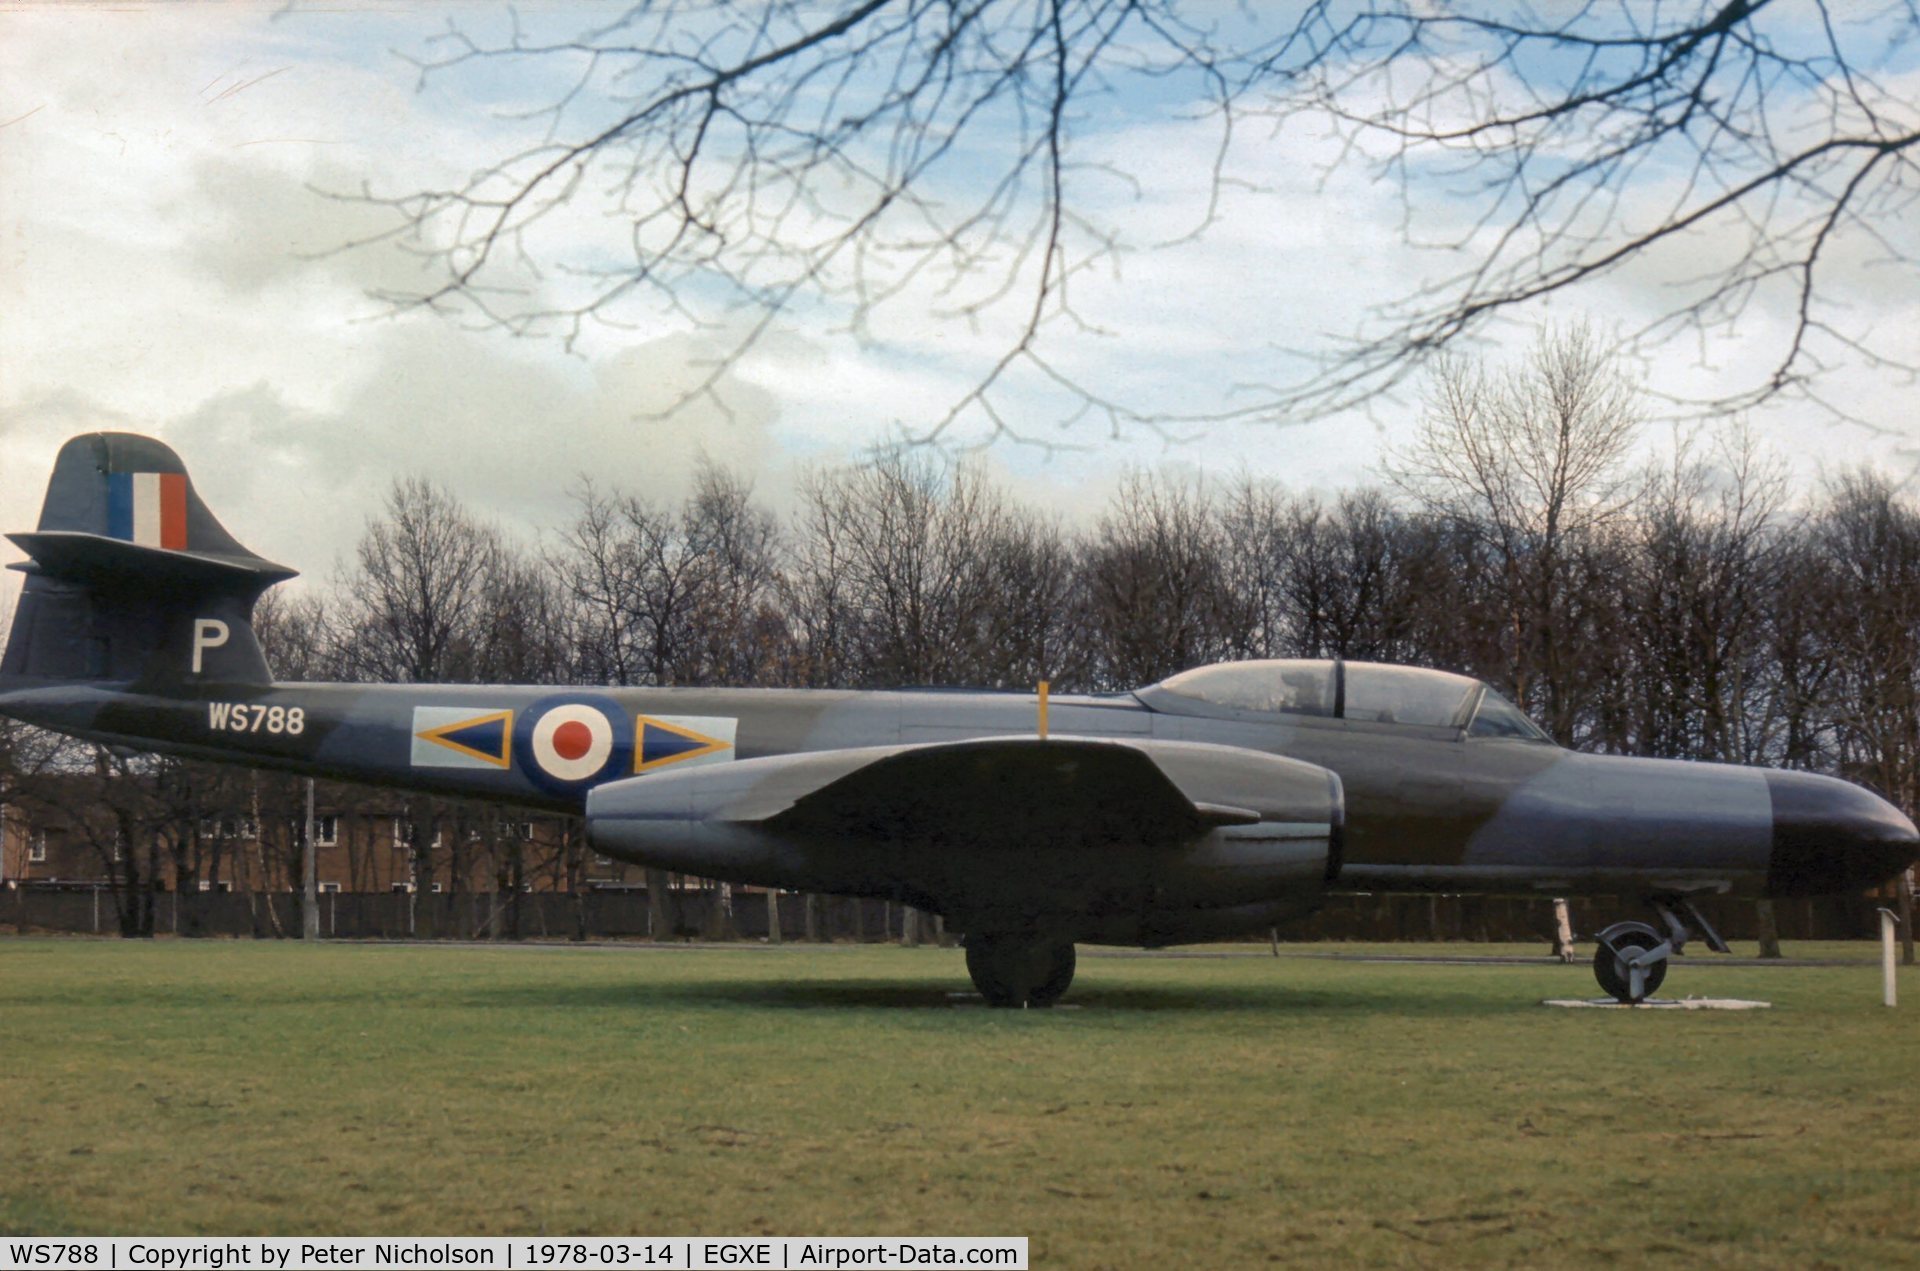 WS788, 1954 Gloster Meteor NF(T).14 C/N Not found WS788, Gate guardian at RAF Leeming as seen in the Spring of 1978 and now preserved since 1991 at the Yorkshire Air Museum.